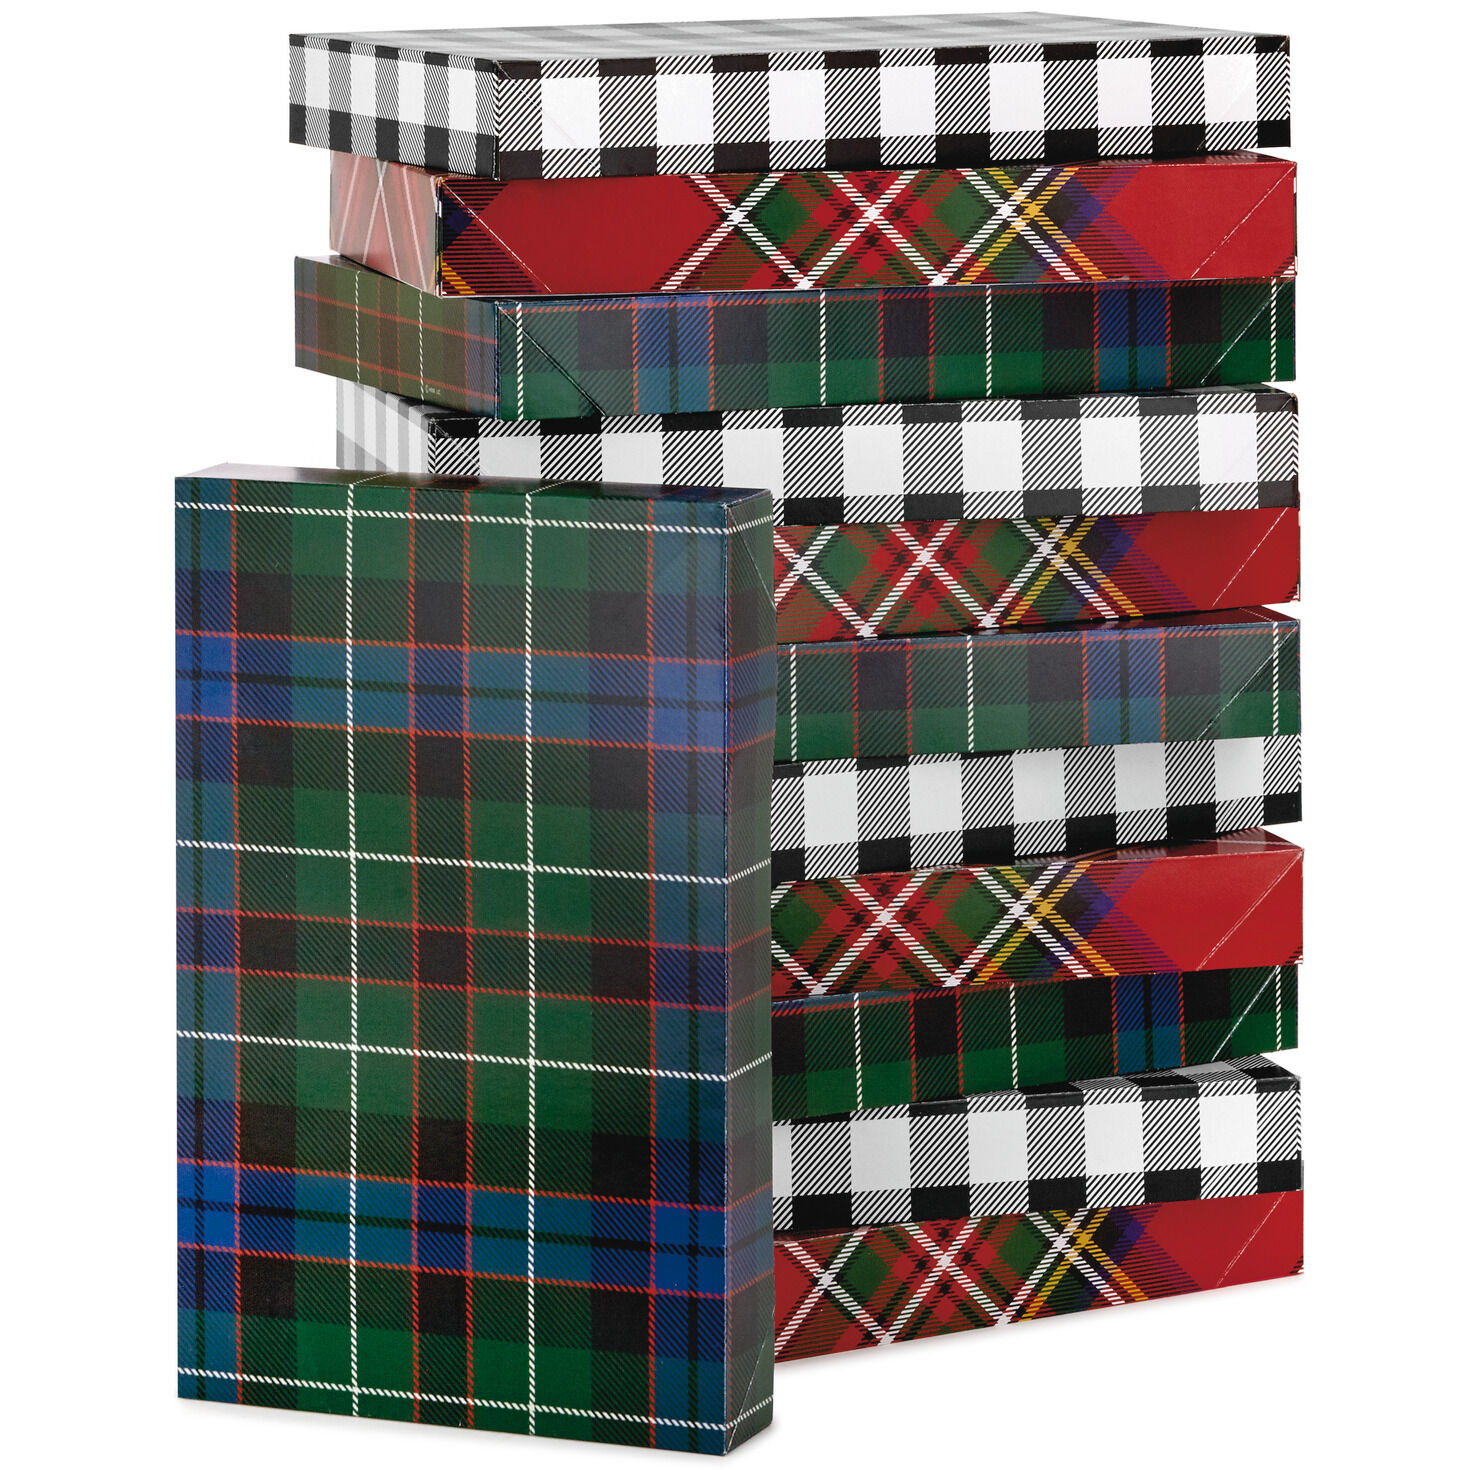 Hallmark Christmas Gift Box Assortment - Pack of 12 Patterned Shirt Boxes  with Lids for Wrapping Gifts - Artificial Christmas Tree Shop